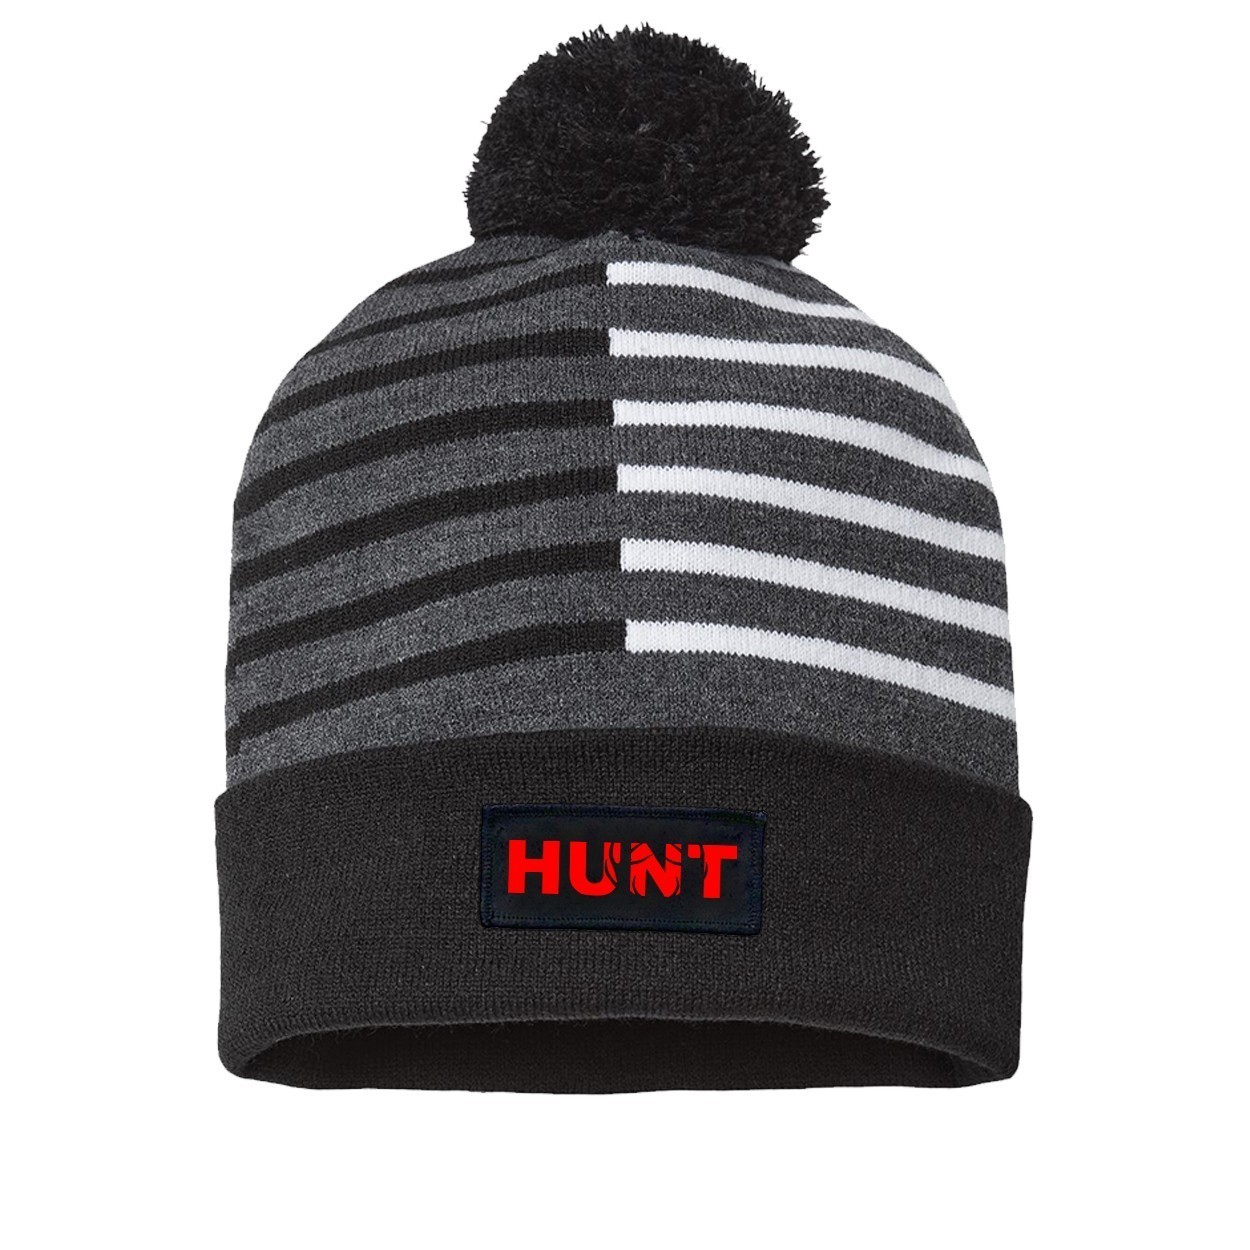 Hunt Rack Logo Night Out Woven Patch Roll Up Pom Knit Beanie Half Color Black/White (Red Logo)